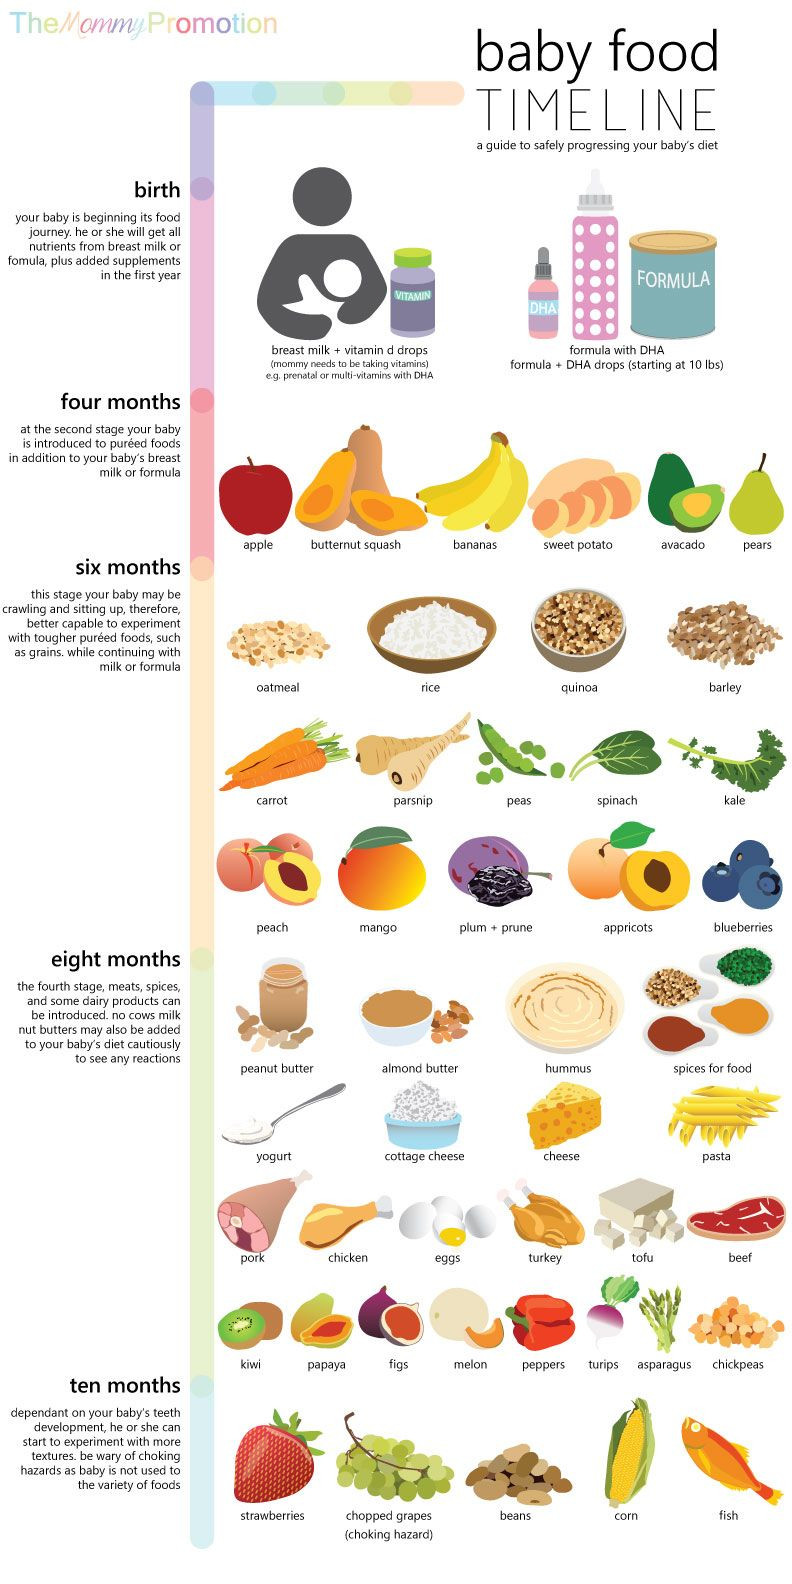 Food For 10 Months Old Baby Recipes
 Baby Food Timeline Allowed Foods for Baby Birth to 10